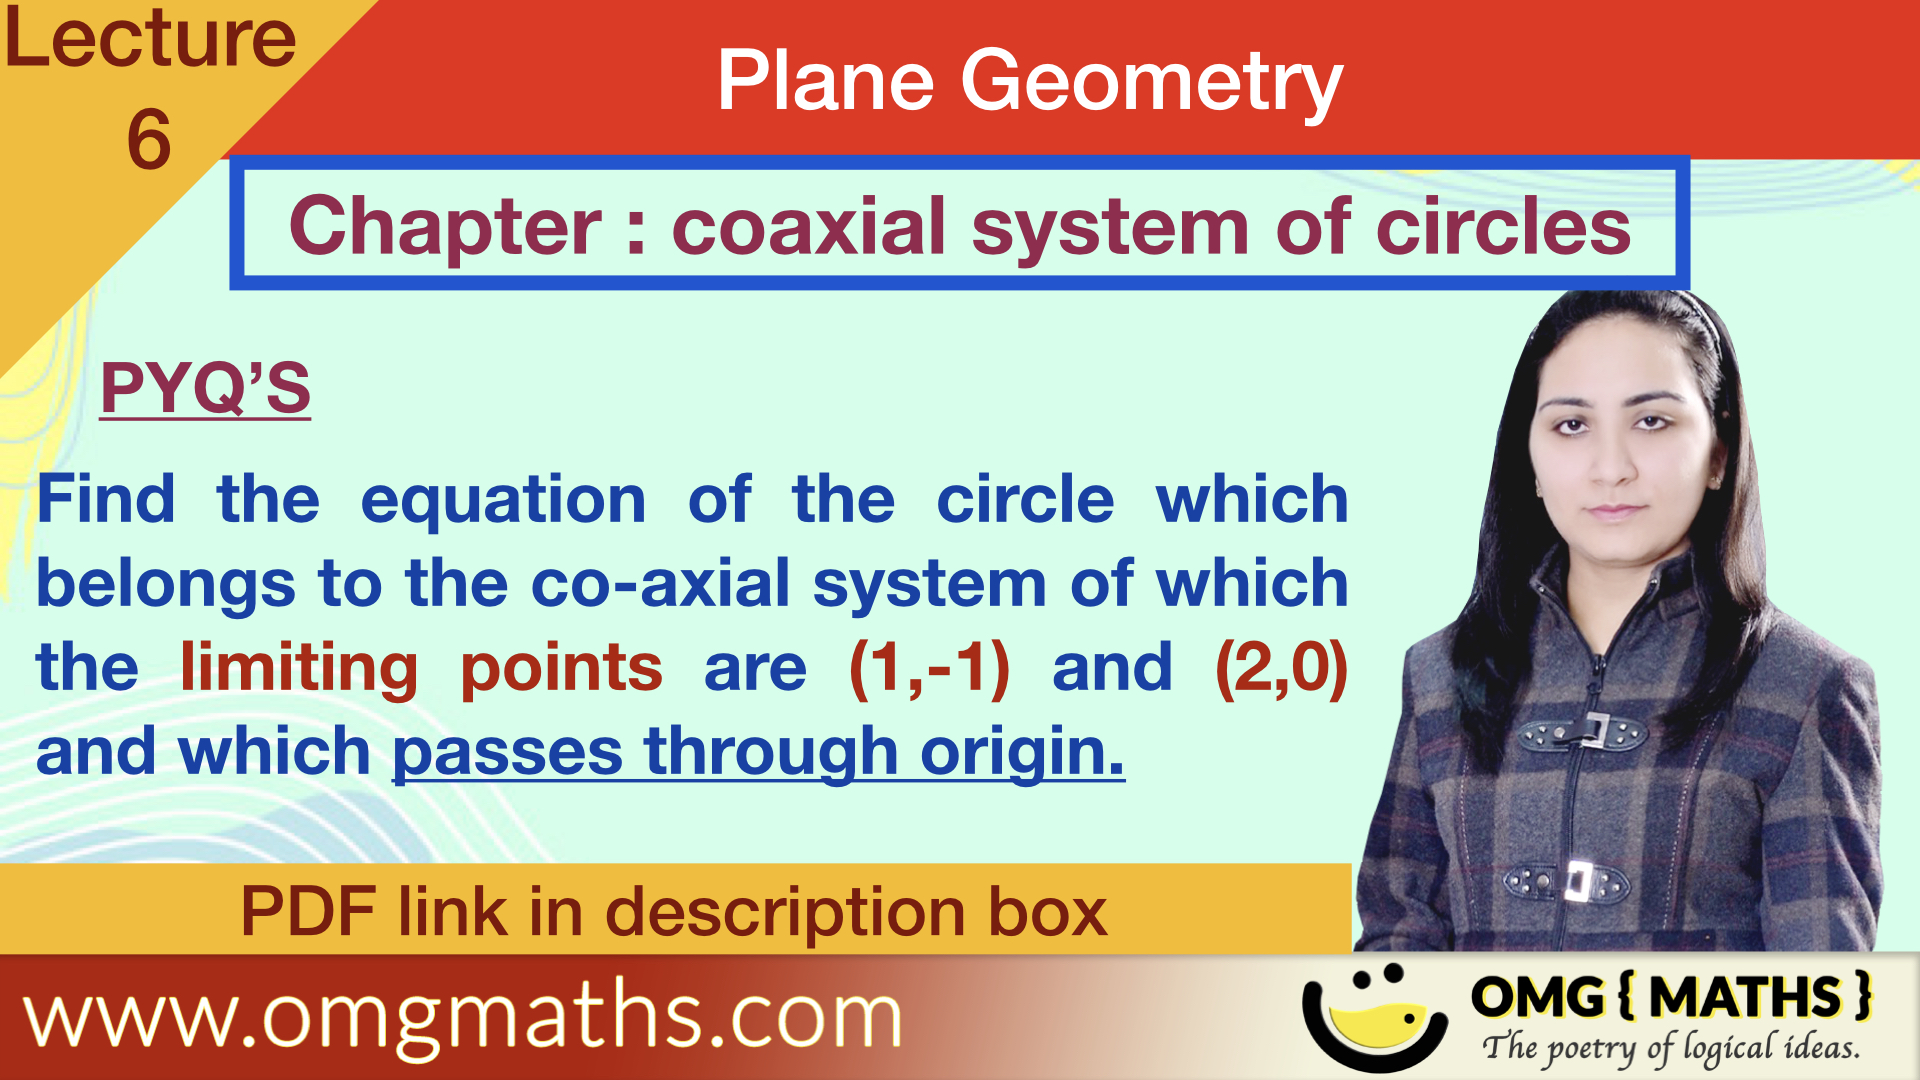 Coaxial system of circles| pyq 5 | Plane Geometry | bsc maths